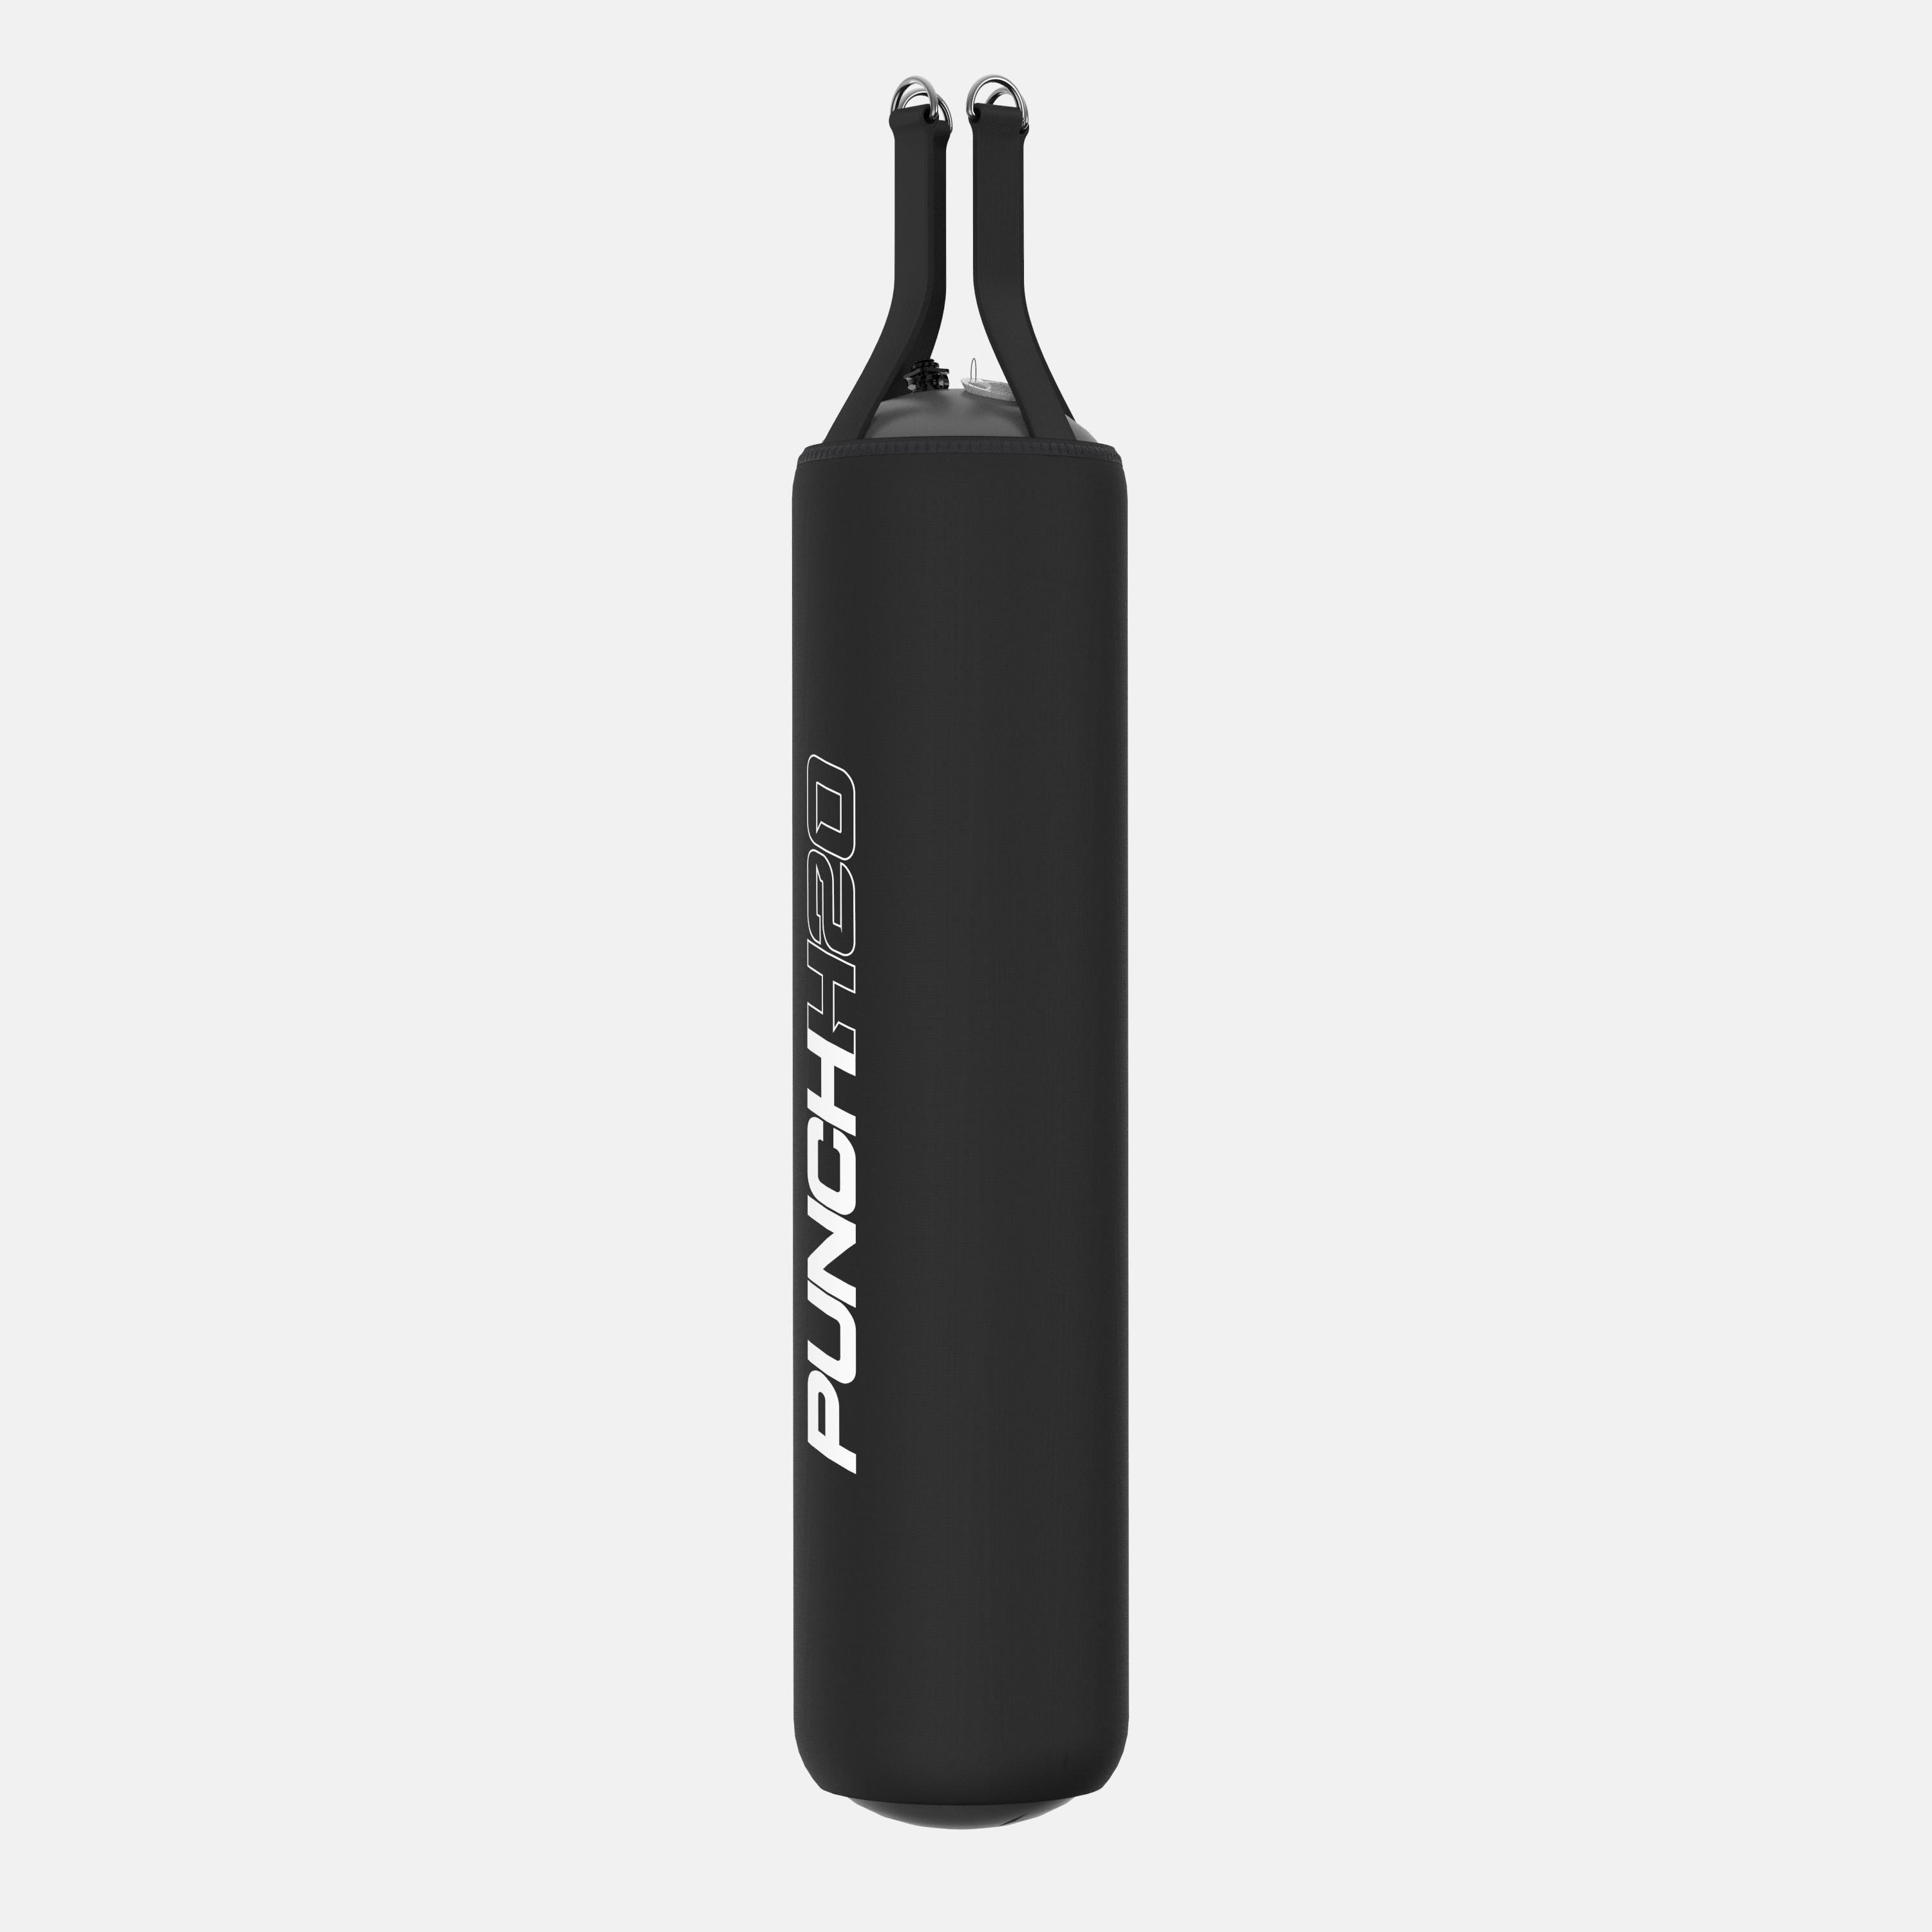  QALUCS Water Heavy Punching Bag, Optimal Size 3.3 ft; Up to  150 lbs, Boxing and Martial Arts Training Bag, to be Filled with Water